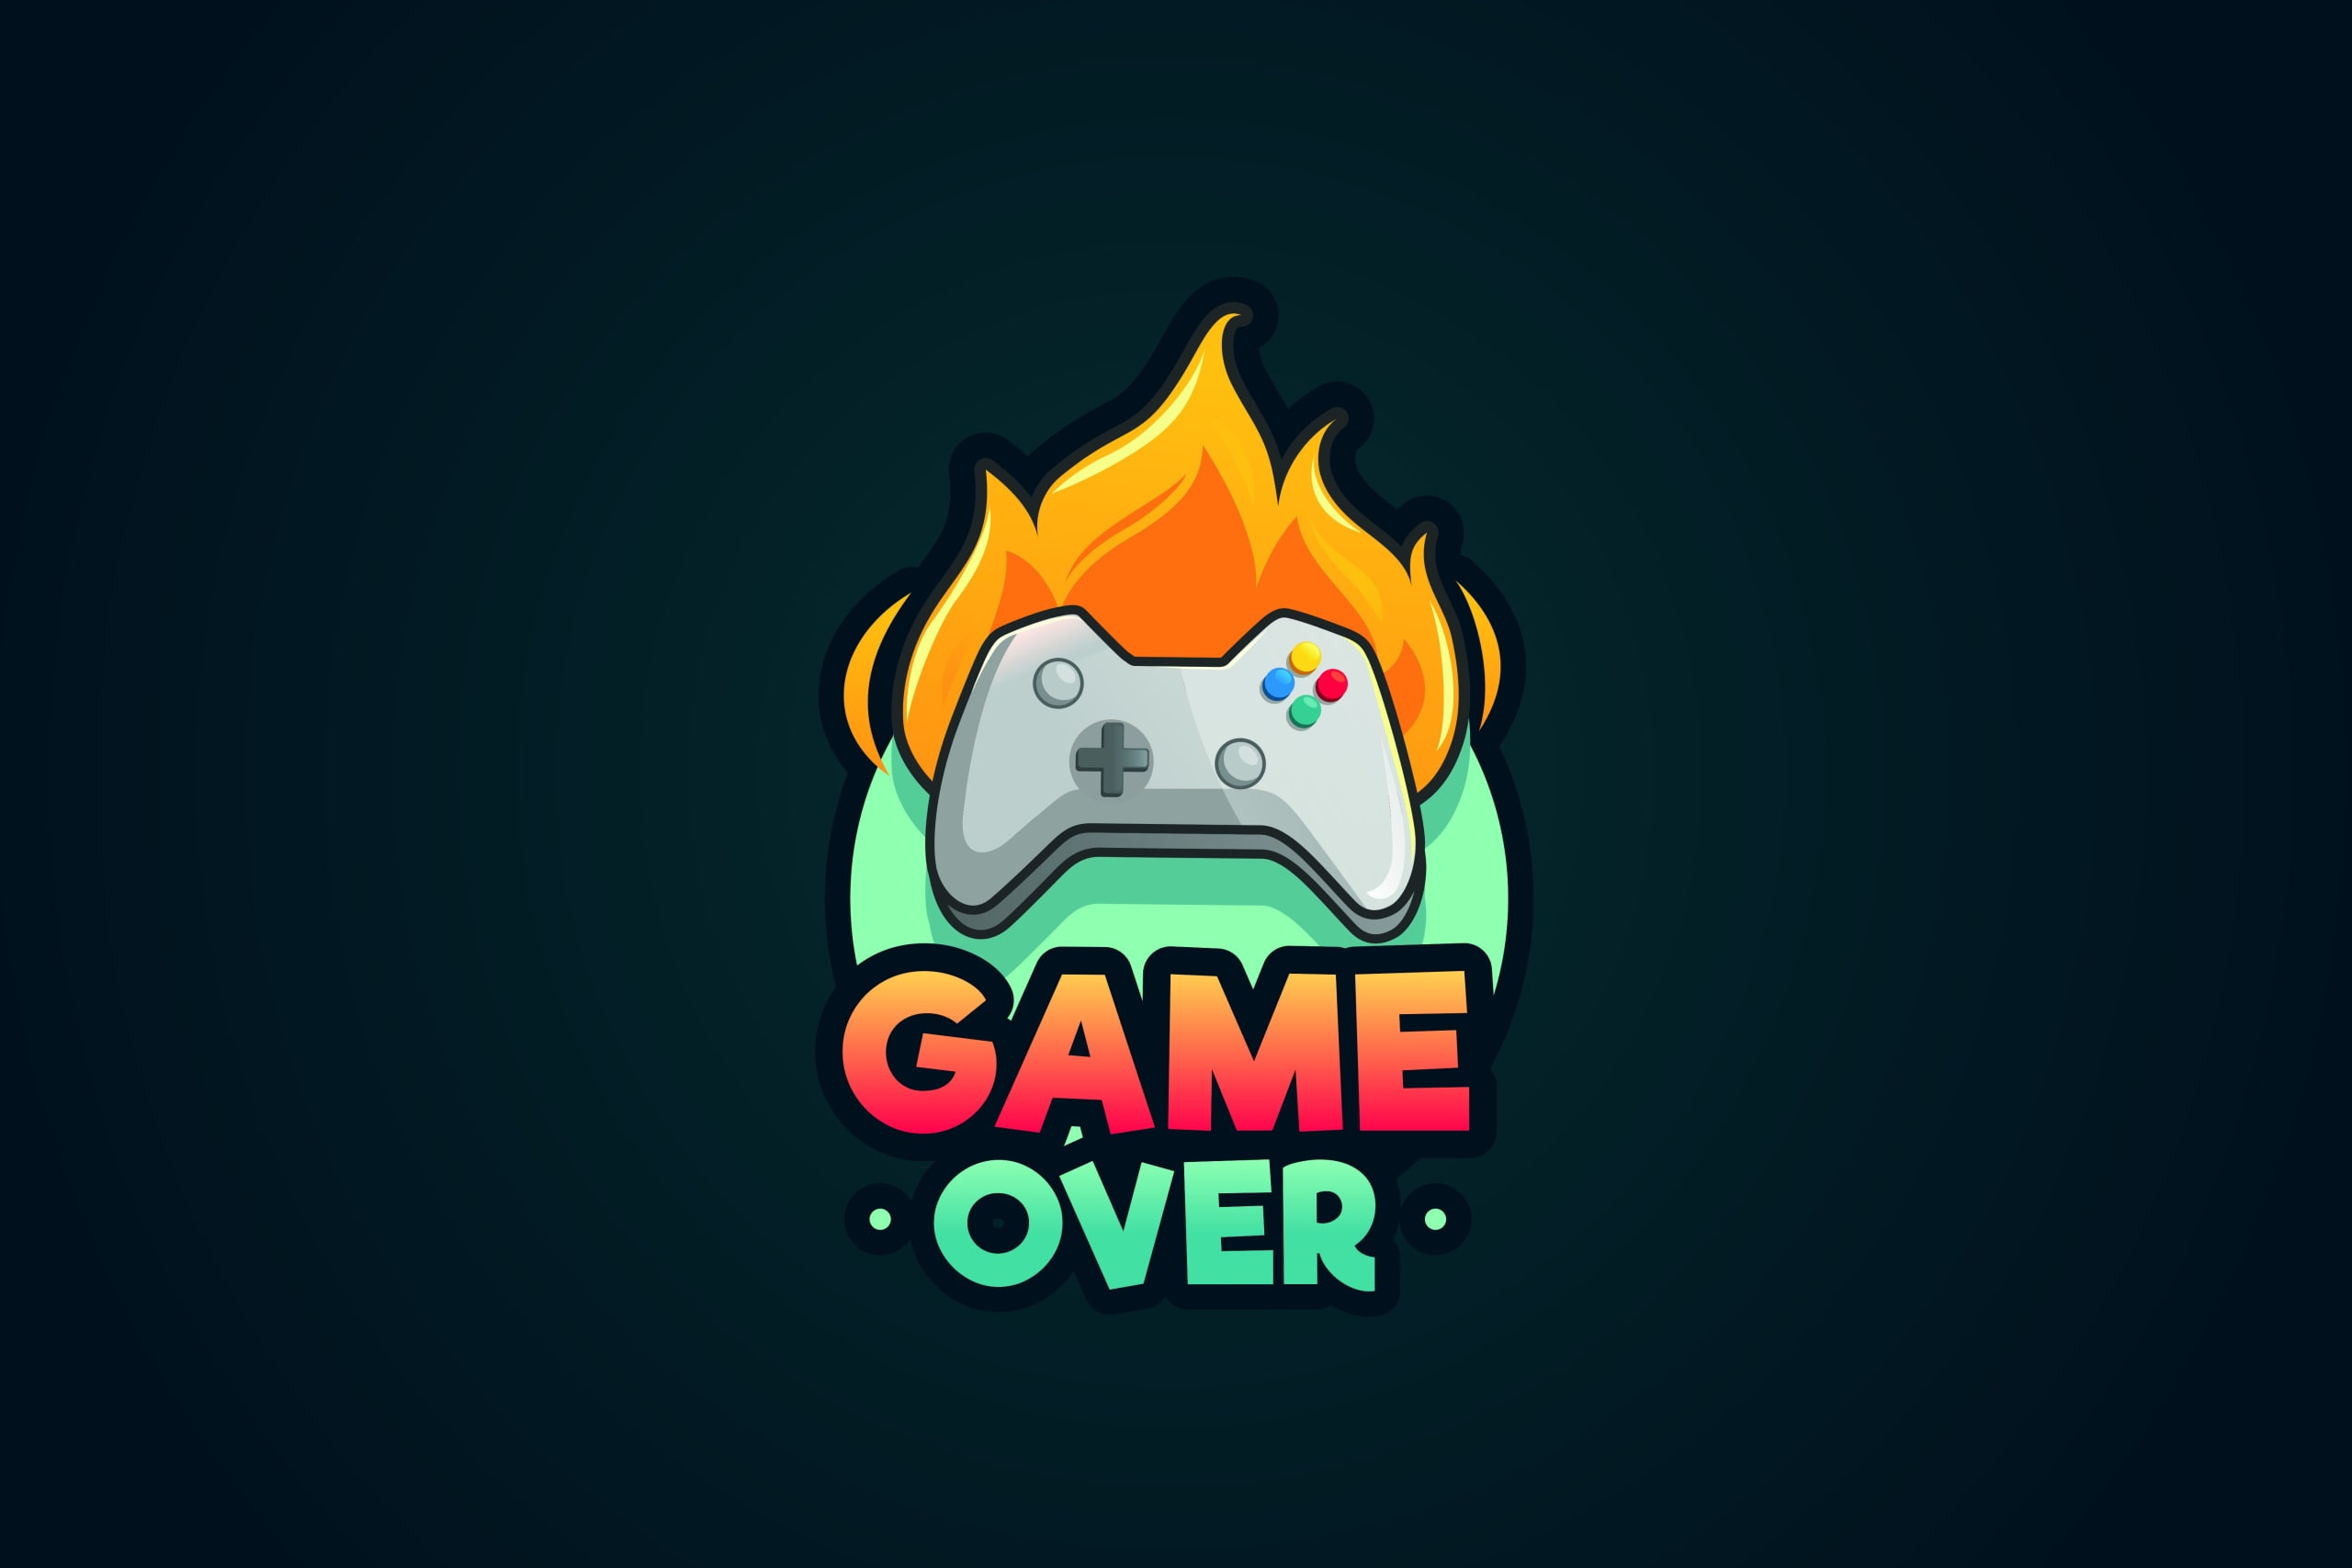 GAME OVER, minimalism, controllers, simple background, video games